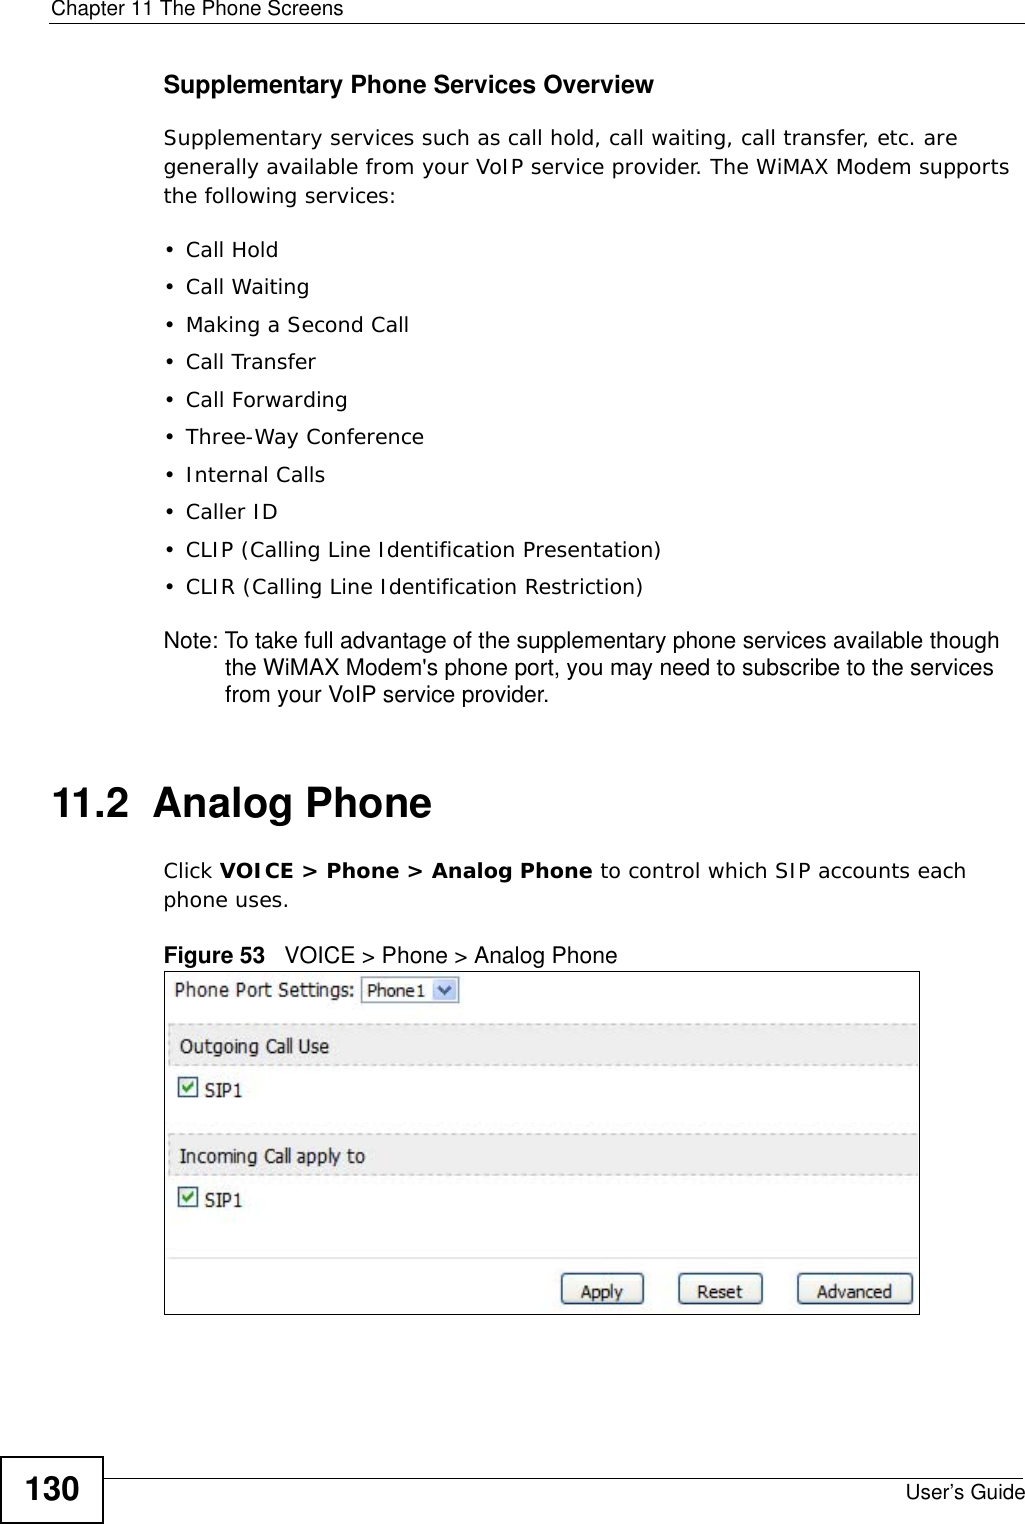 Chapter 11 The Phone ScreensUser’s Guide130Supplementary Phone Services OverviewSupplementary services such as call hold, call waiting, call transfer, etc. are generally available from your VoIP service provider. The WiMAX Modem supports the following services:• Call Hold• Call Waiting• Making a Second Call• Call Transfer• Call Forwarding• Three-Way Conference•Internal Calls• Caller ID• CLIP (Calling Line Identification Presentation)• CLIR (Calling Line Identification Restriction)Note: To take full advantage of the supplementary phone services available though the WiMAX Modem&apos;s phone port, you may need to subscribe to the services from your VoIP service provider.11.2  Analog PhoneClick VOICE &gt; Phone &gt; Analog Phone to control which SIP accounts each phone uses.Figure 53   VOICE &gt; Phone &gt; Analog Phone